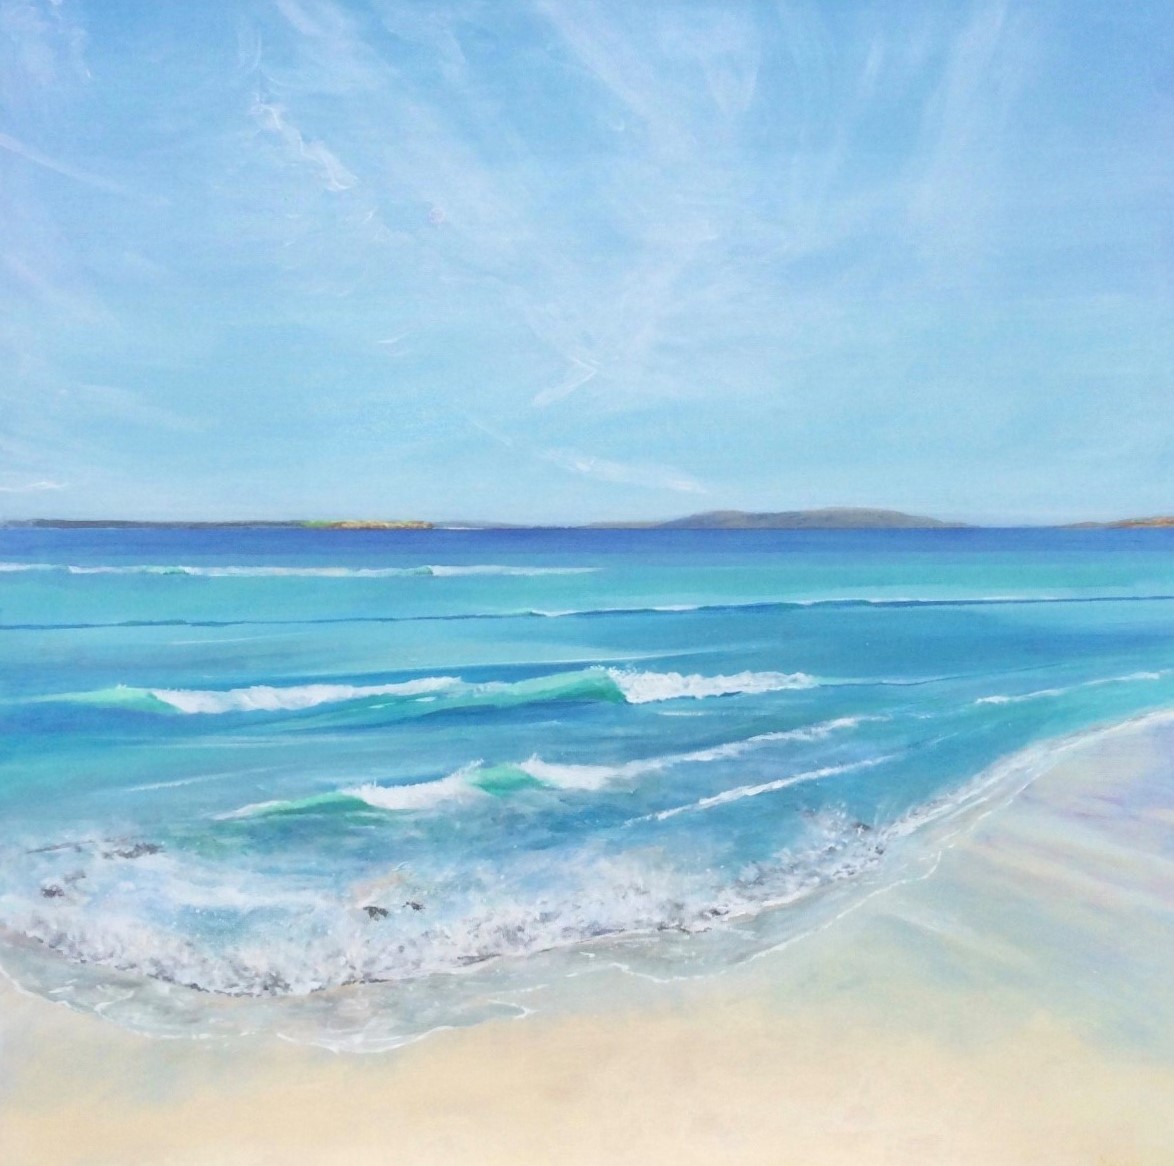 'Summer, The North End, Iona' by artist Michael Murison